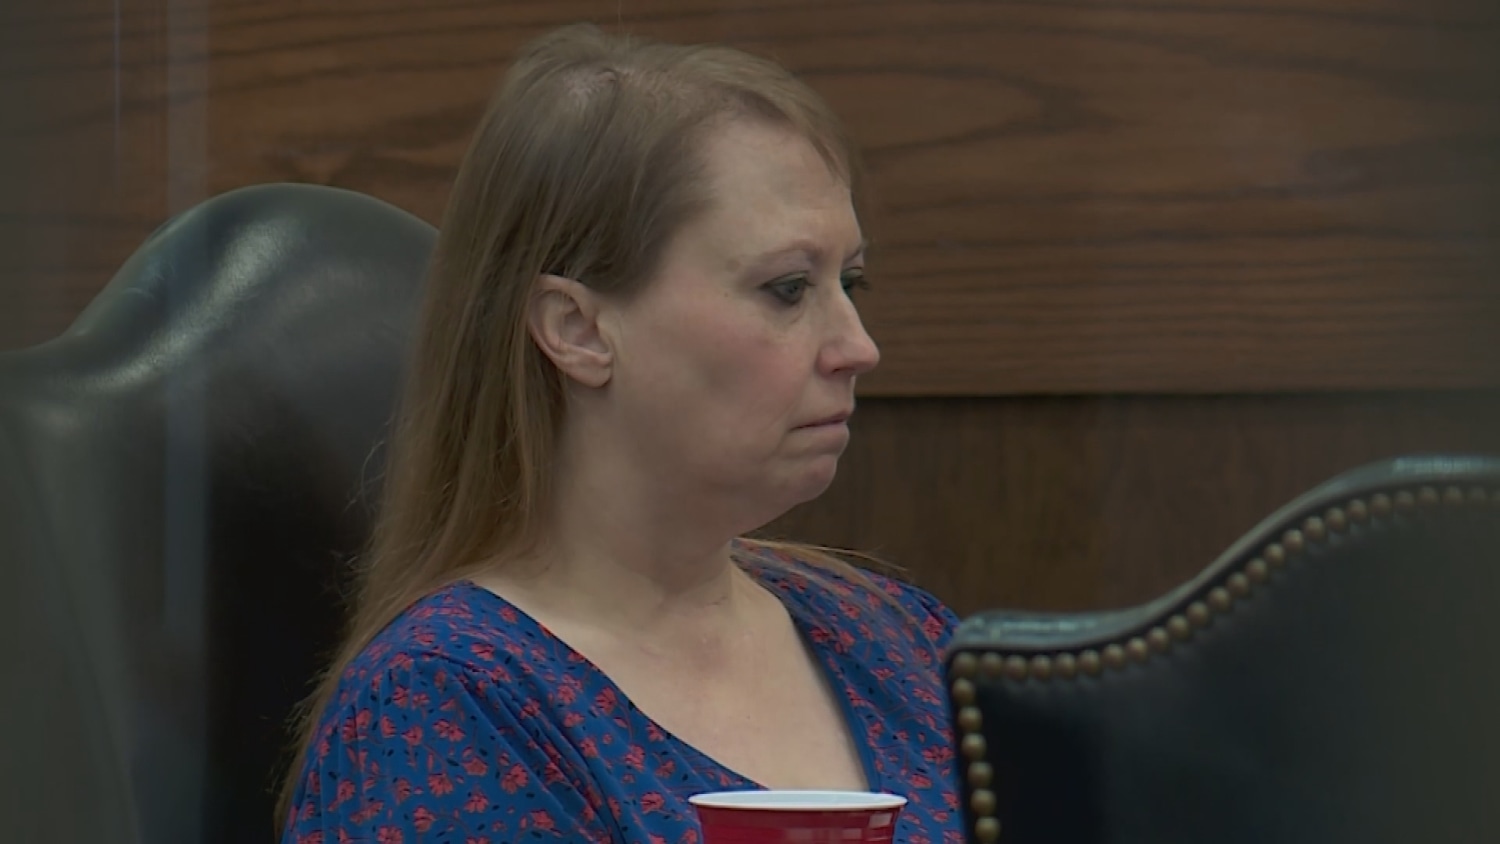 Oklahoma woman gets life in prison after admitting she asked her lover to kill her allegedly abusive pastor husband